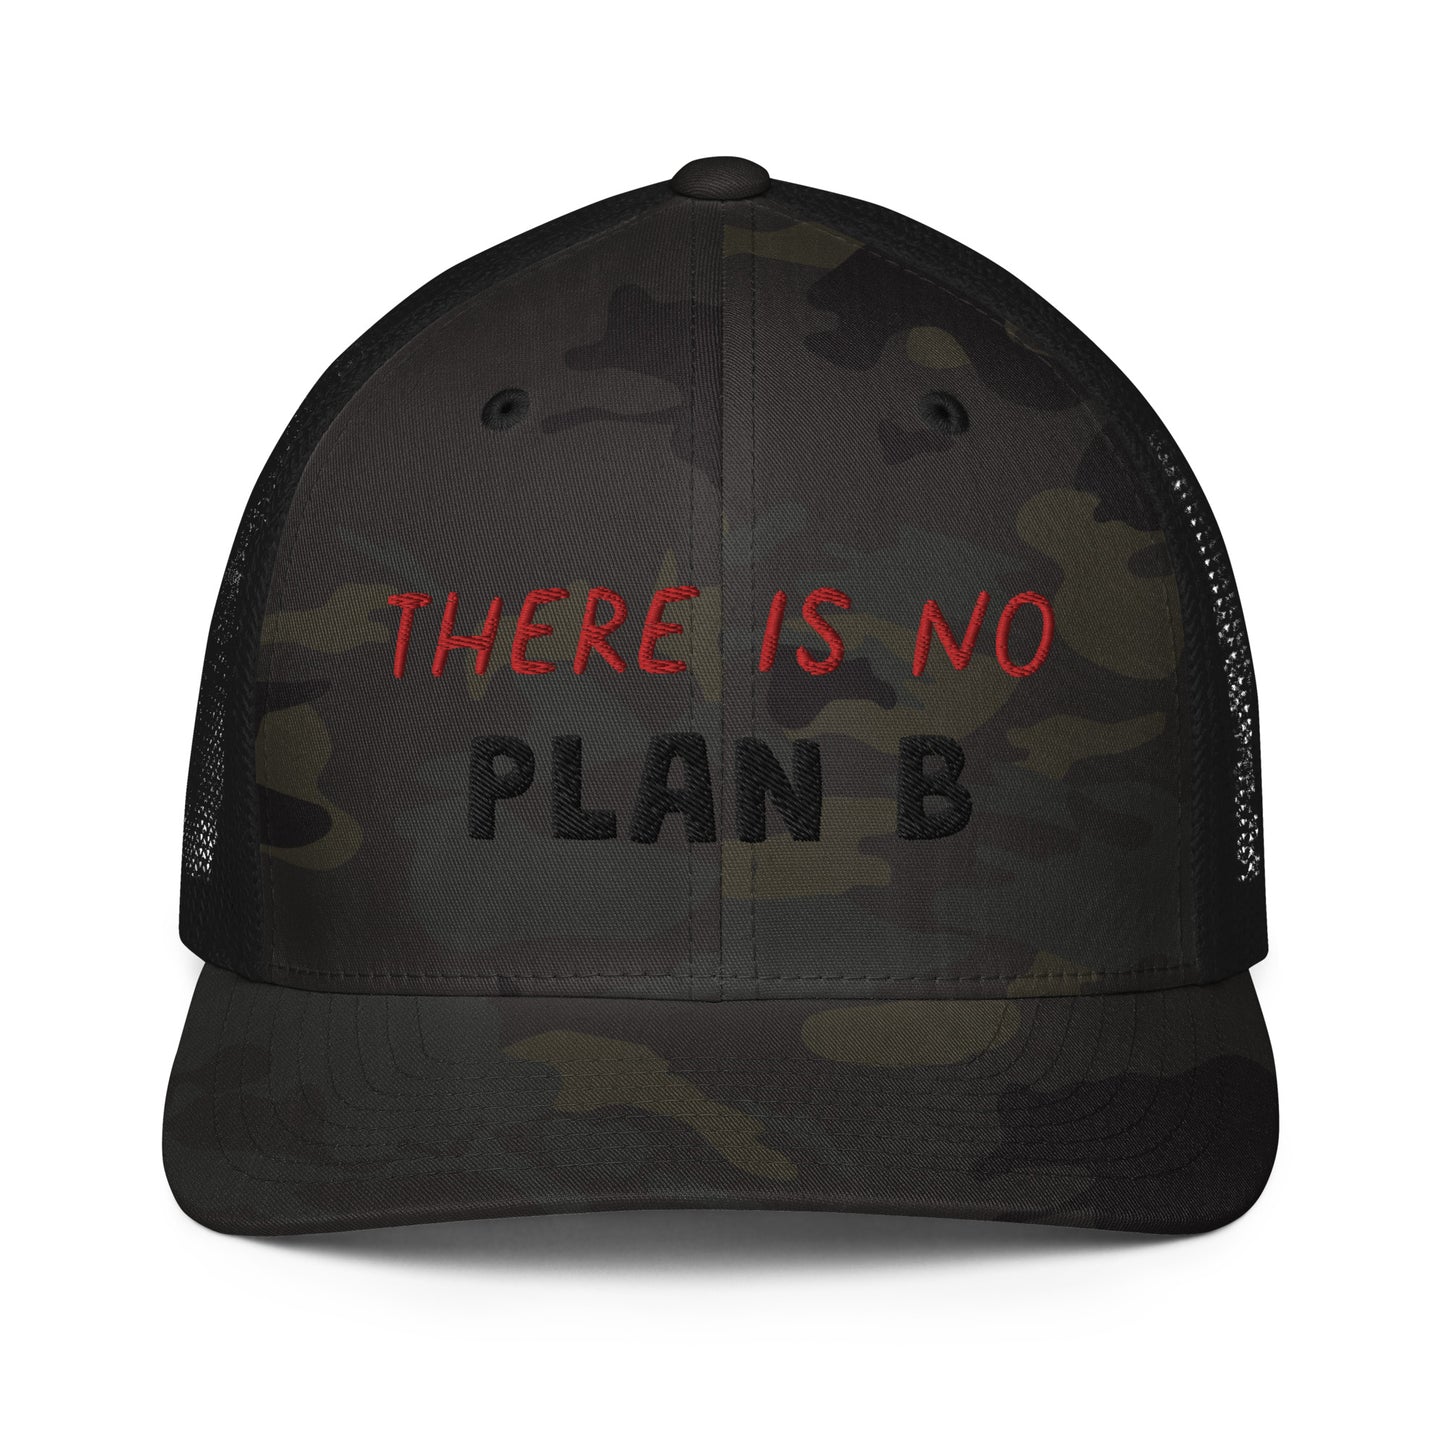 Closed-back Trucker Hat - There is No Plan B